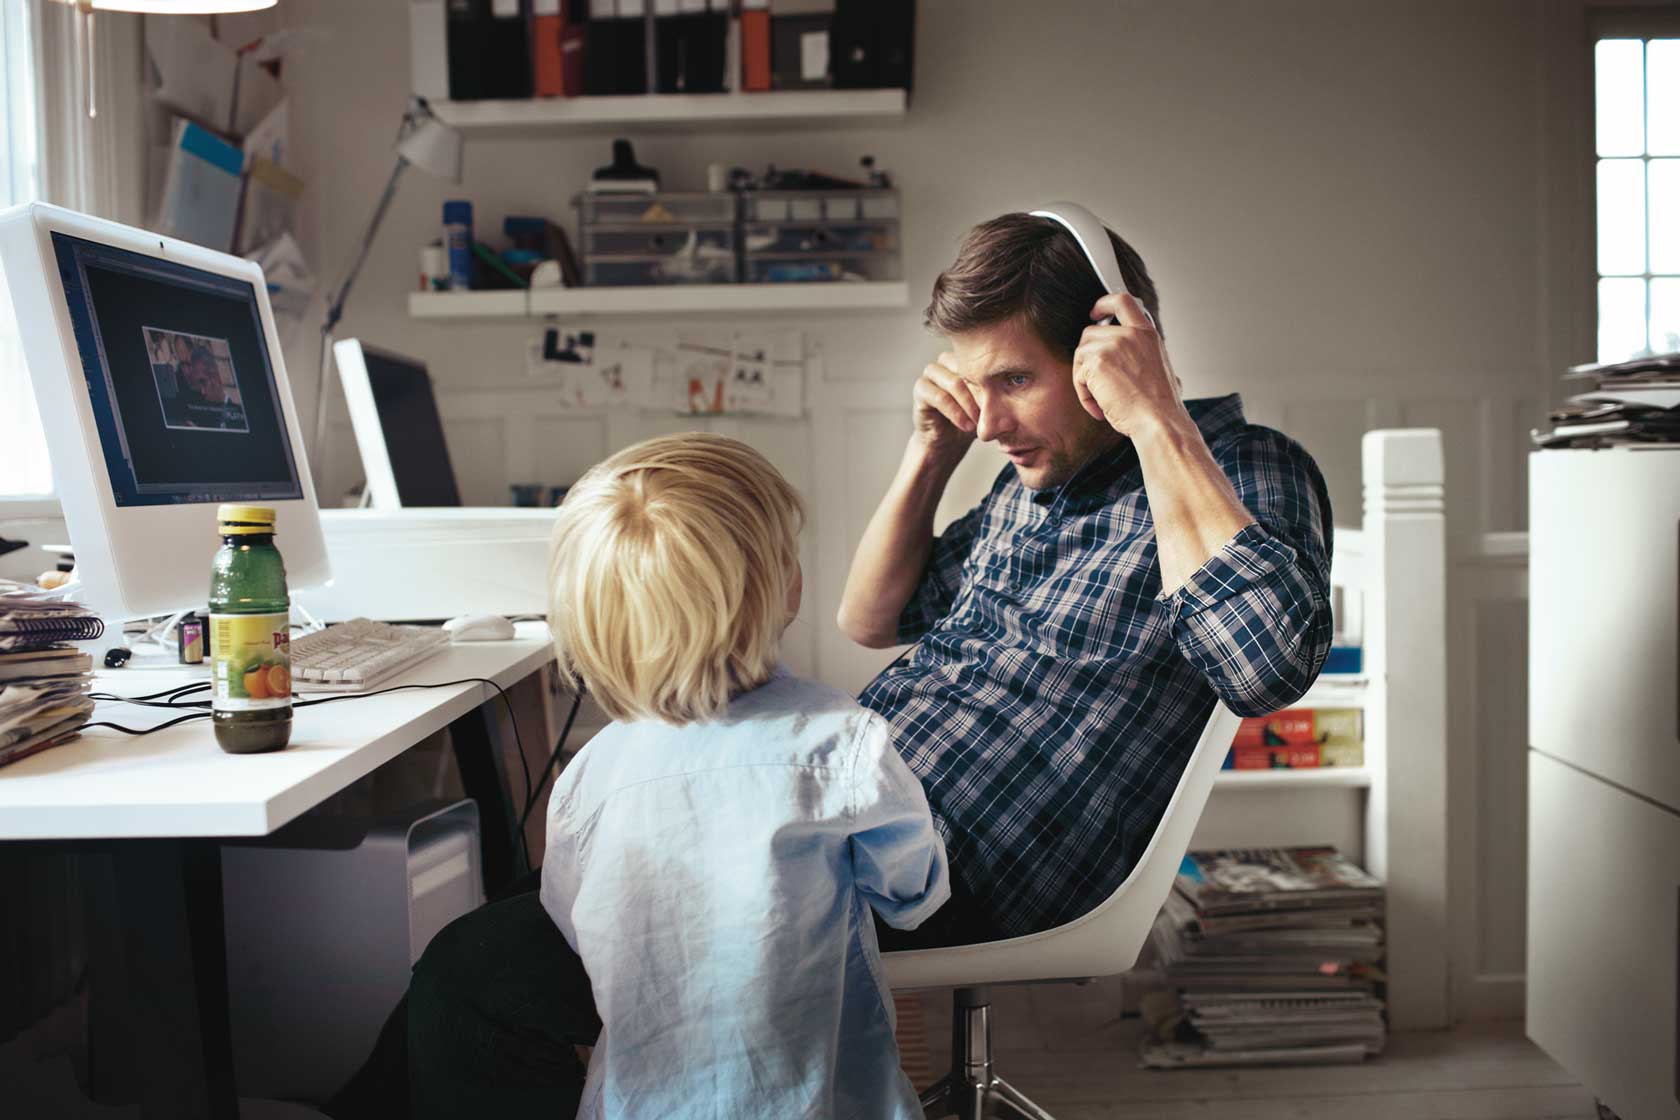 A child and a man by a computer in an office